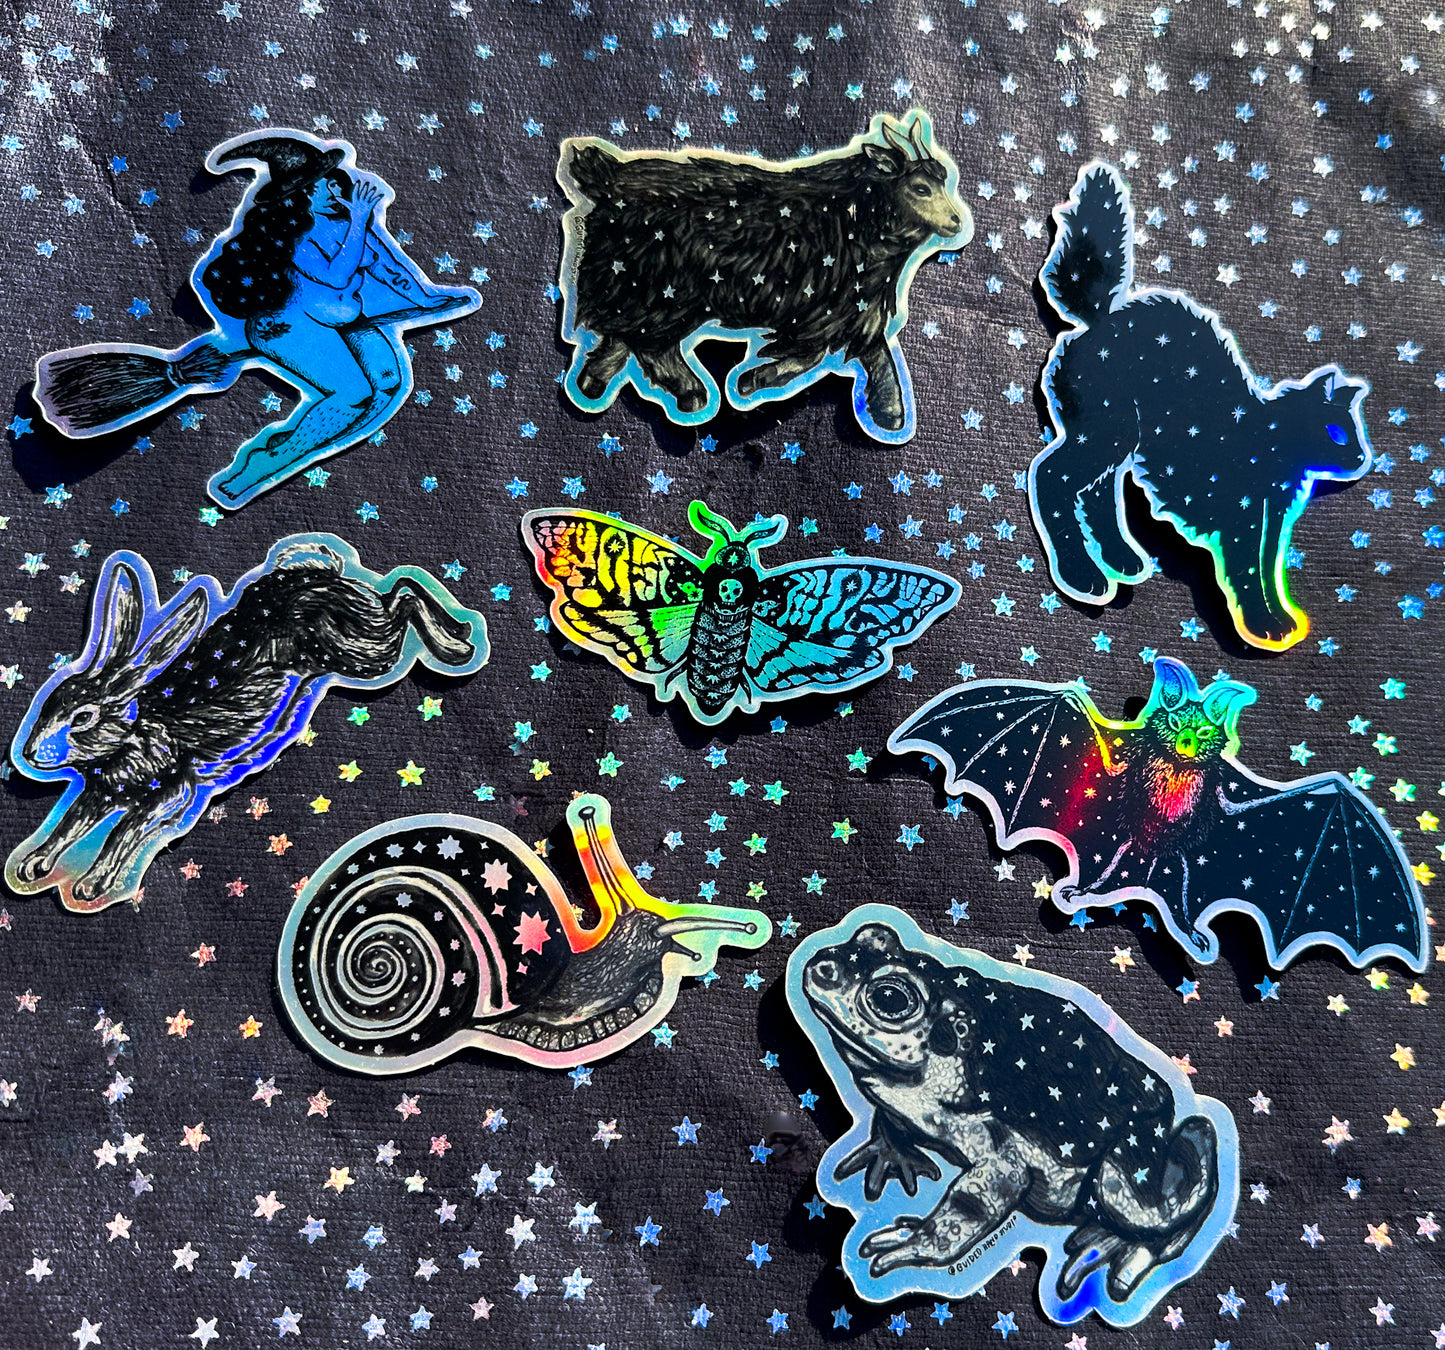 3 for $12 Holo Sticker Deal